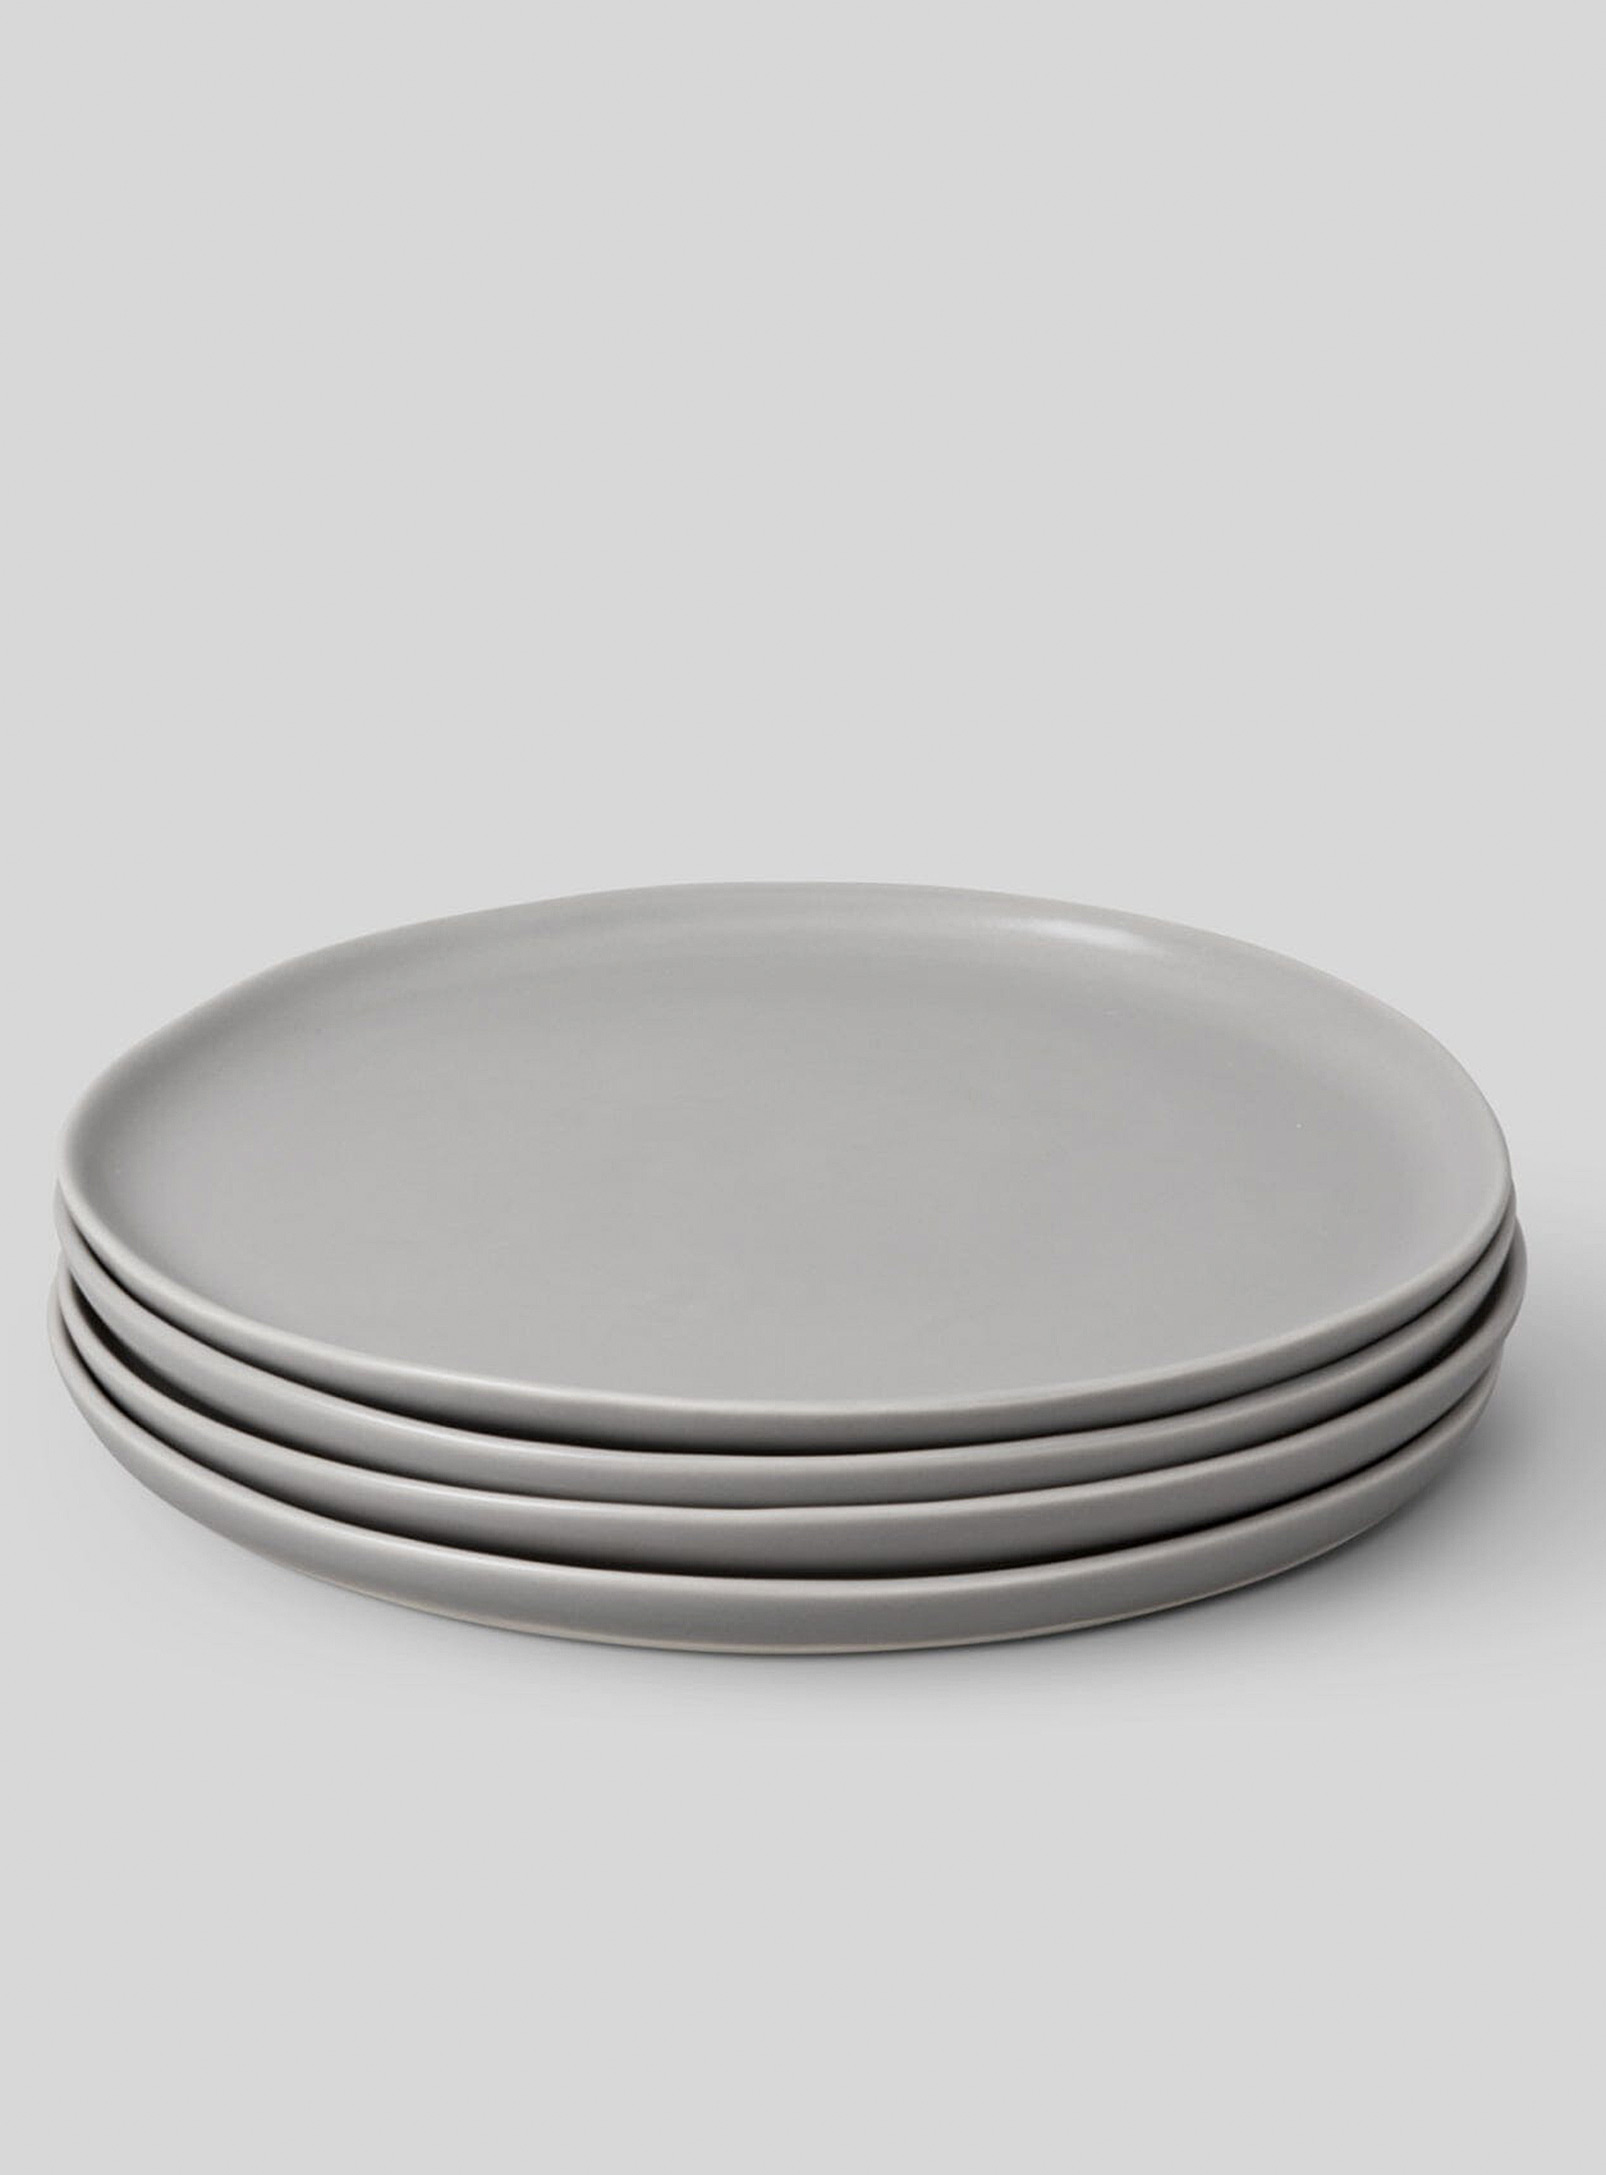 Fable Minimalist Stoneware Dinner Plates Set Of 4 In Gray